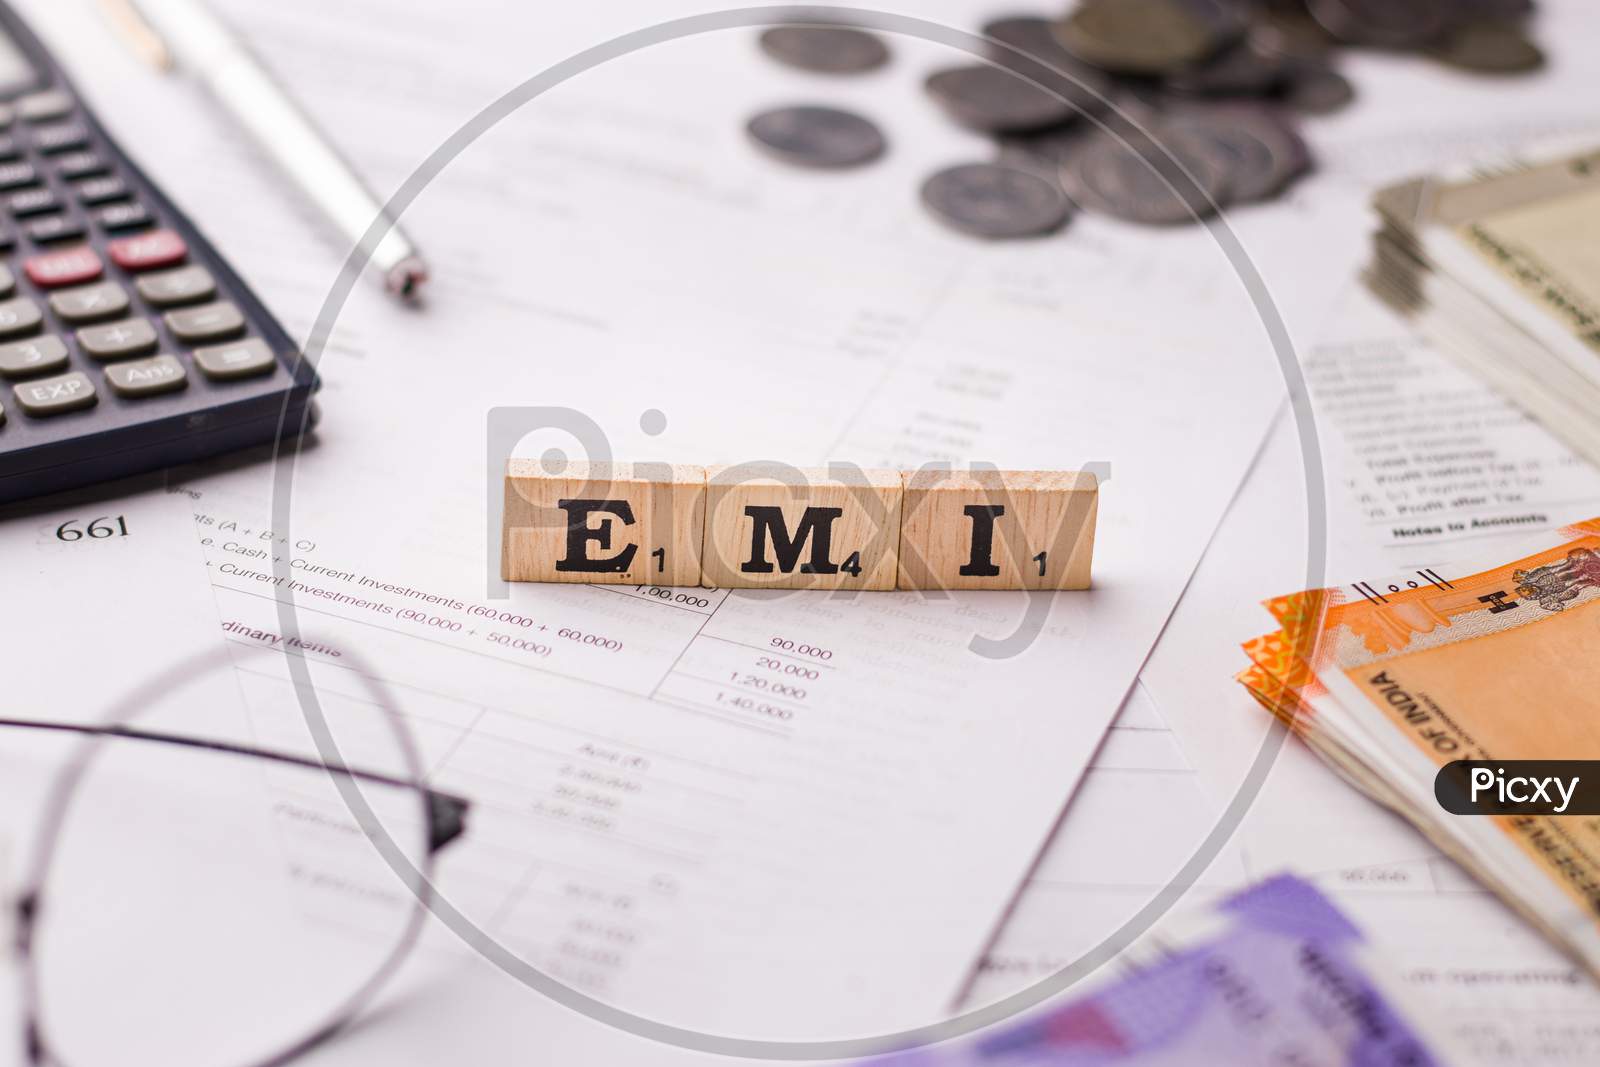 Assam, india - March 30, 2021 : Word EMI written on wooden cubes stock image.